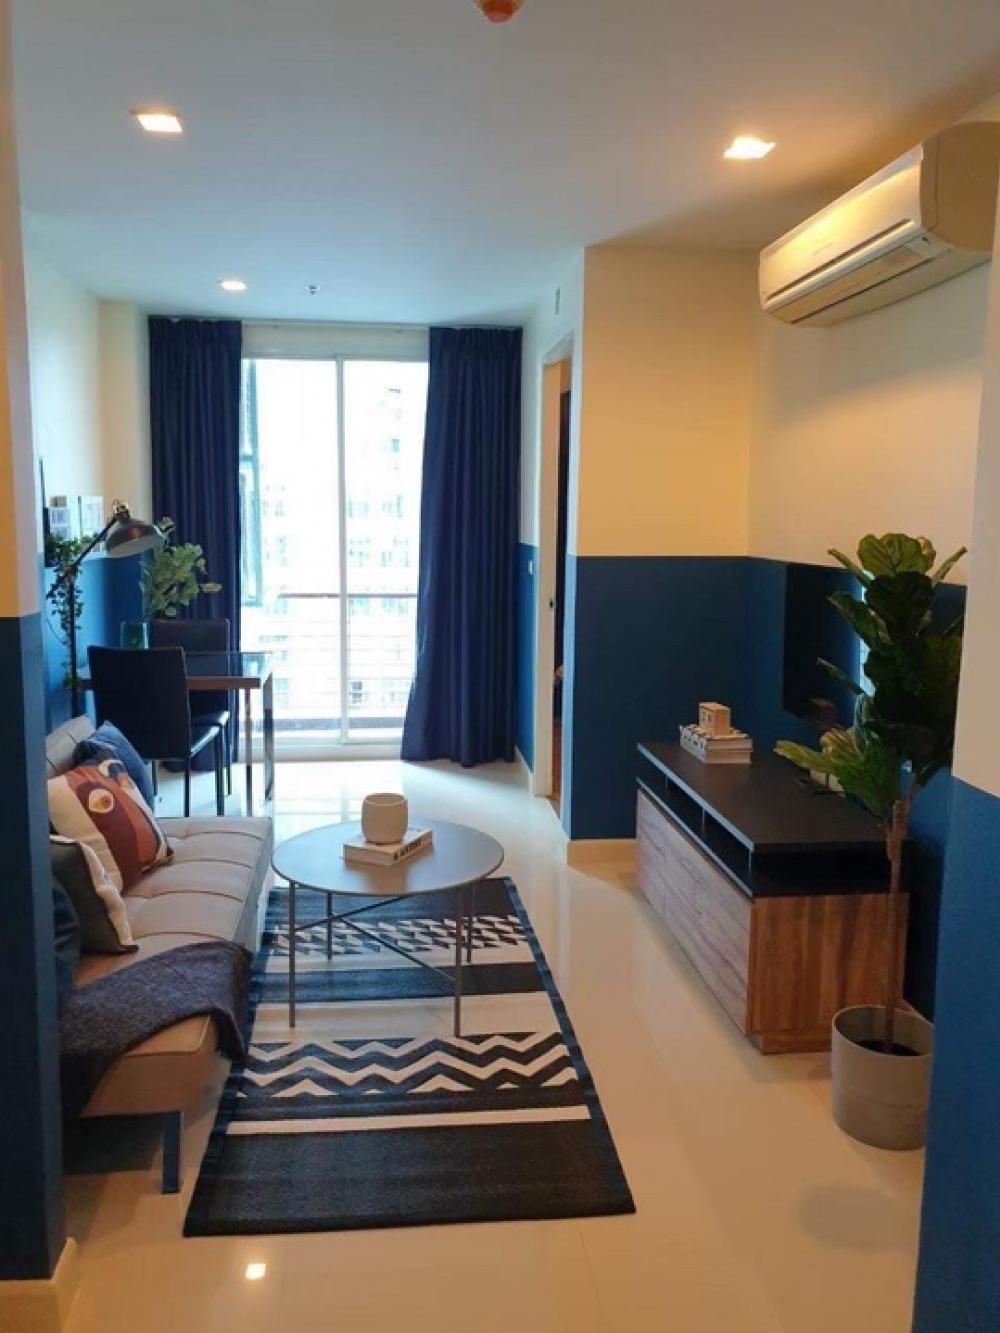 For RentCondoSiam Paragon ,Chulalongkorn,Samyan : For rent, Wish @ Samyan (Wish@Samyan), property code #KK296, if interested, contact @condo19 (with @ as well). The room releases very quickly, please hurry.